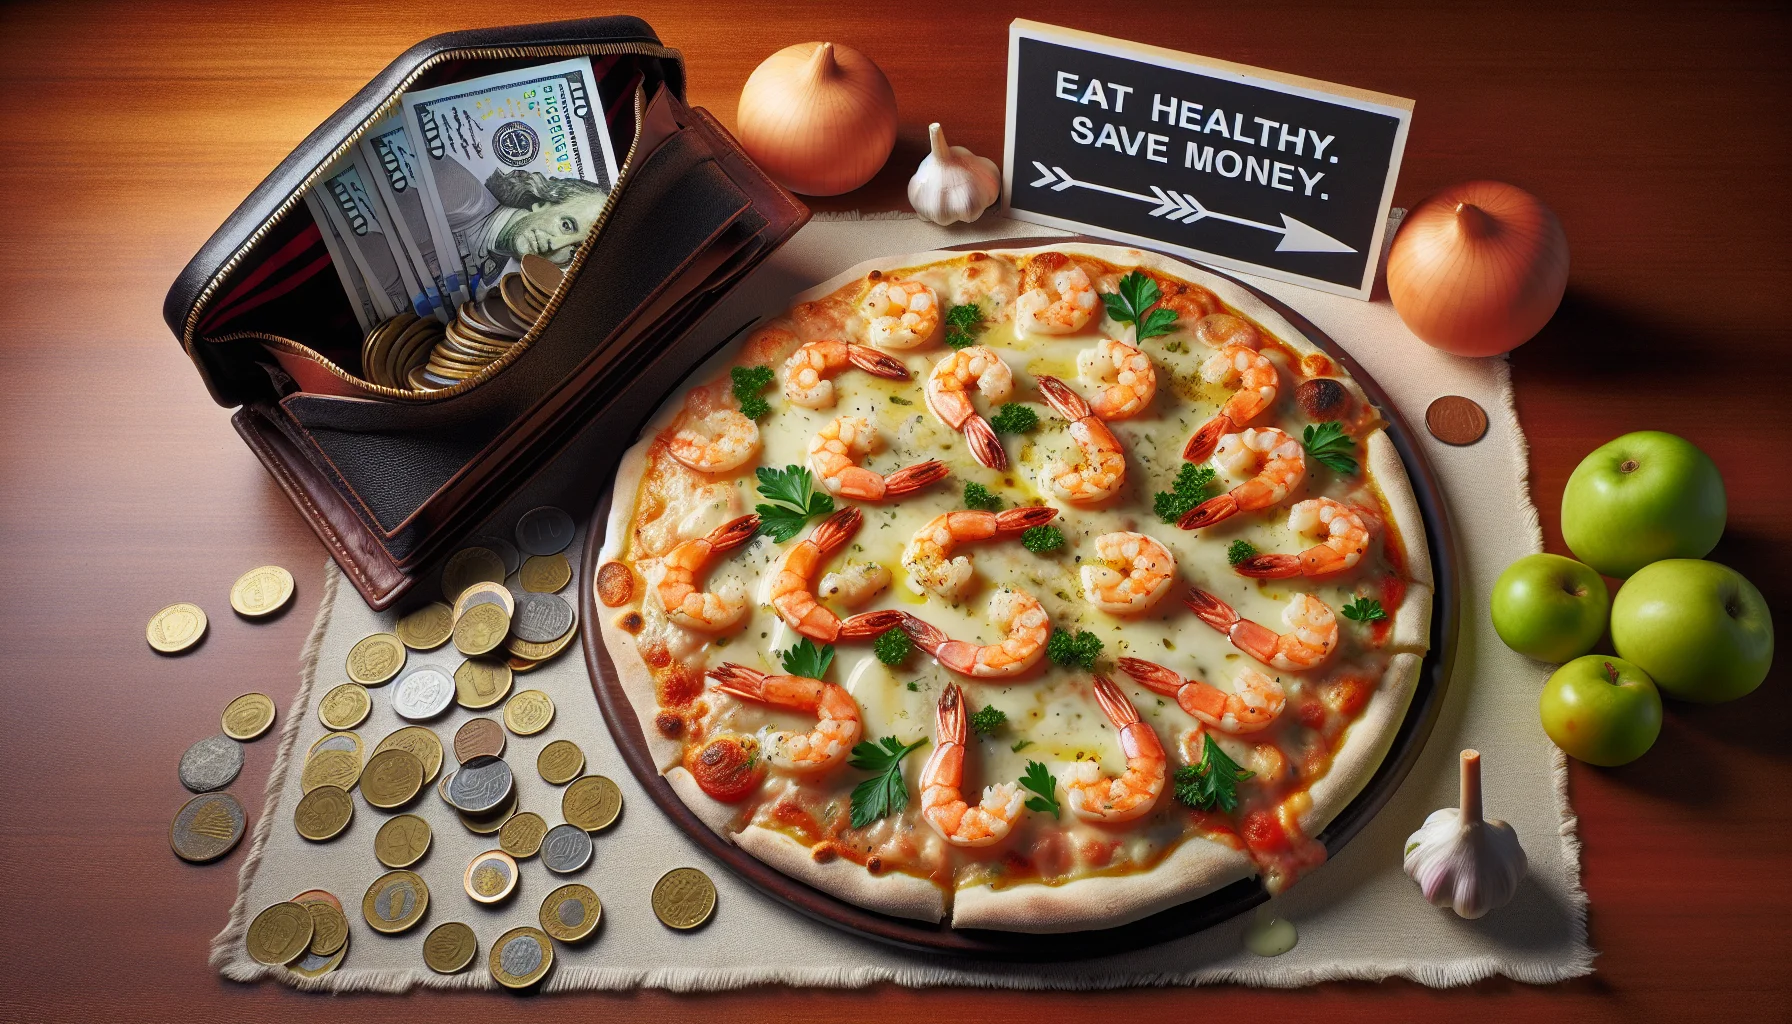 An amusing tableau featuring an appetizing shrimp scampi pizza. The pizza, laden with succulent shrimp, garlic, olive oil, parsley, and a generous sprinkling of mozzarella, is a stunning sight. The crust is thin and perfectly baked, with hints of golden brown. It's placed on a tastefully decorated wooden dining table. Beside the pizza, there's an open wallet filled with money, with coins humorously rolling out towards a sign saying 'Eat Healthy. Save Money.' and an arrow pointing towards the pizza, indicating that this delicious meal is an affordable choice for a healthy diet.